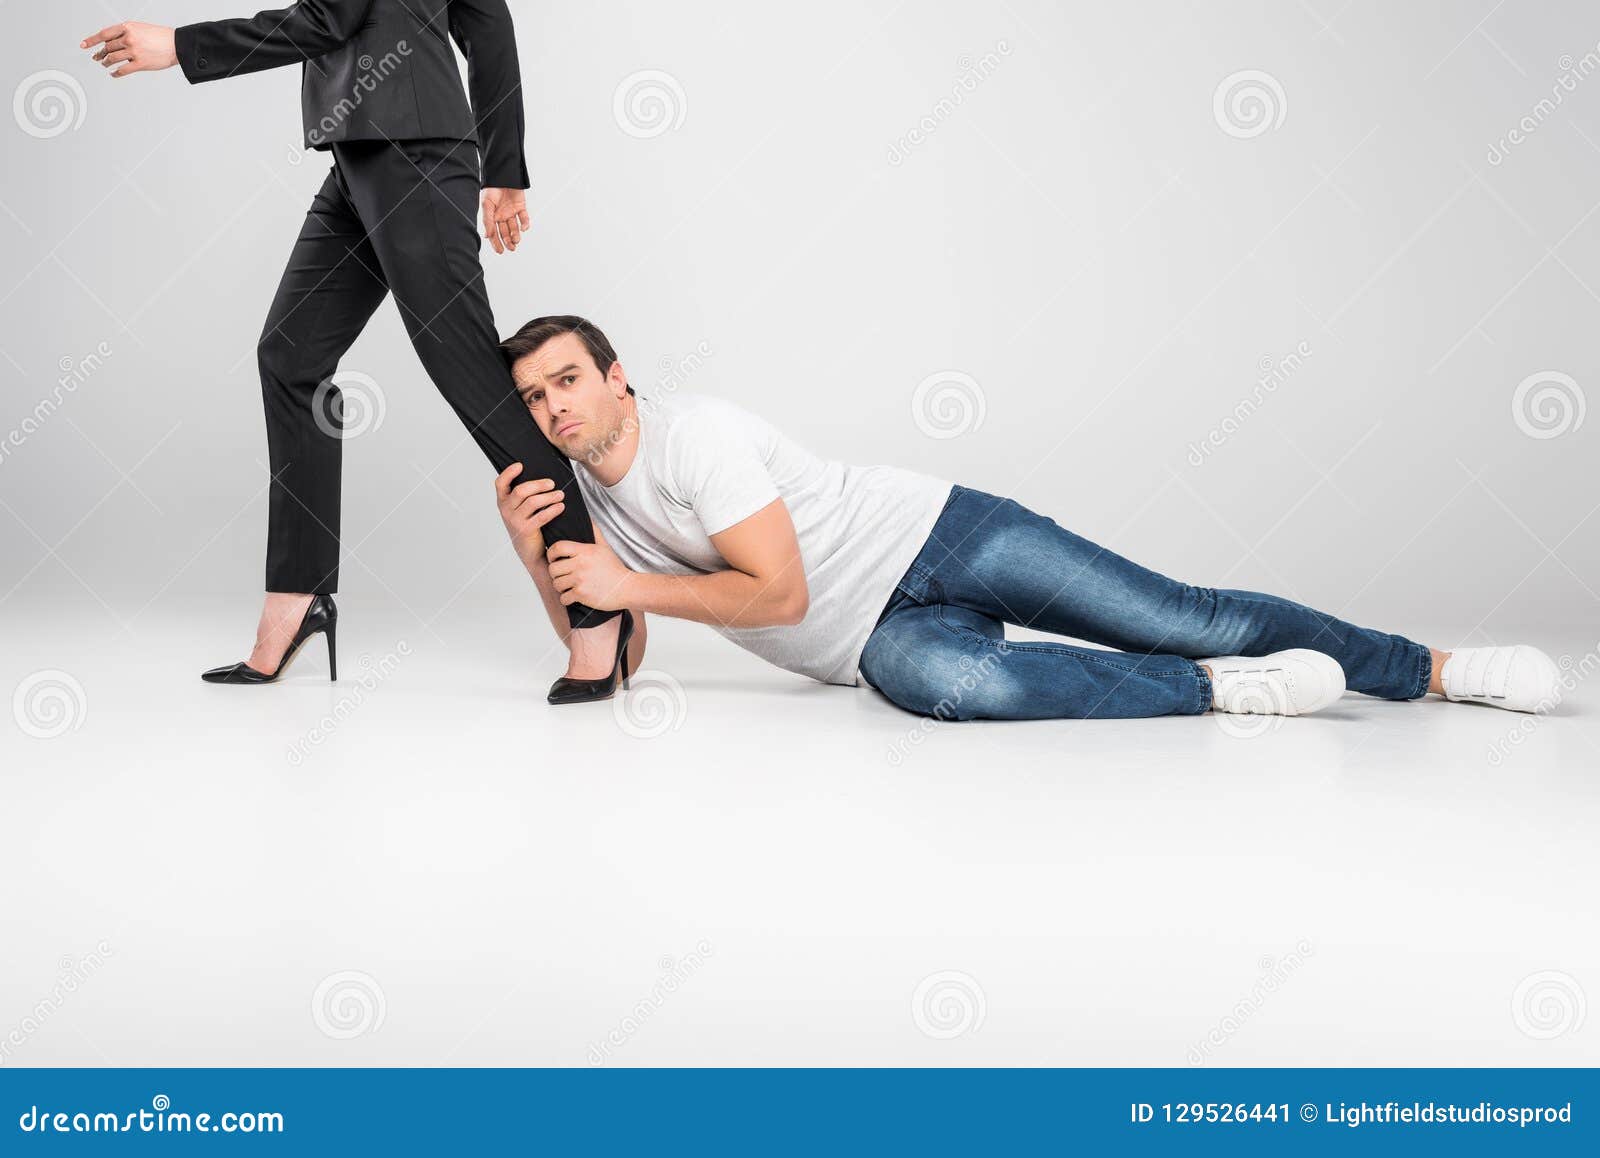 Husband Holding Leg Of His Business Wife Feminism Concept Stock Image Image Of Profession